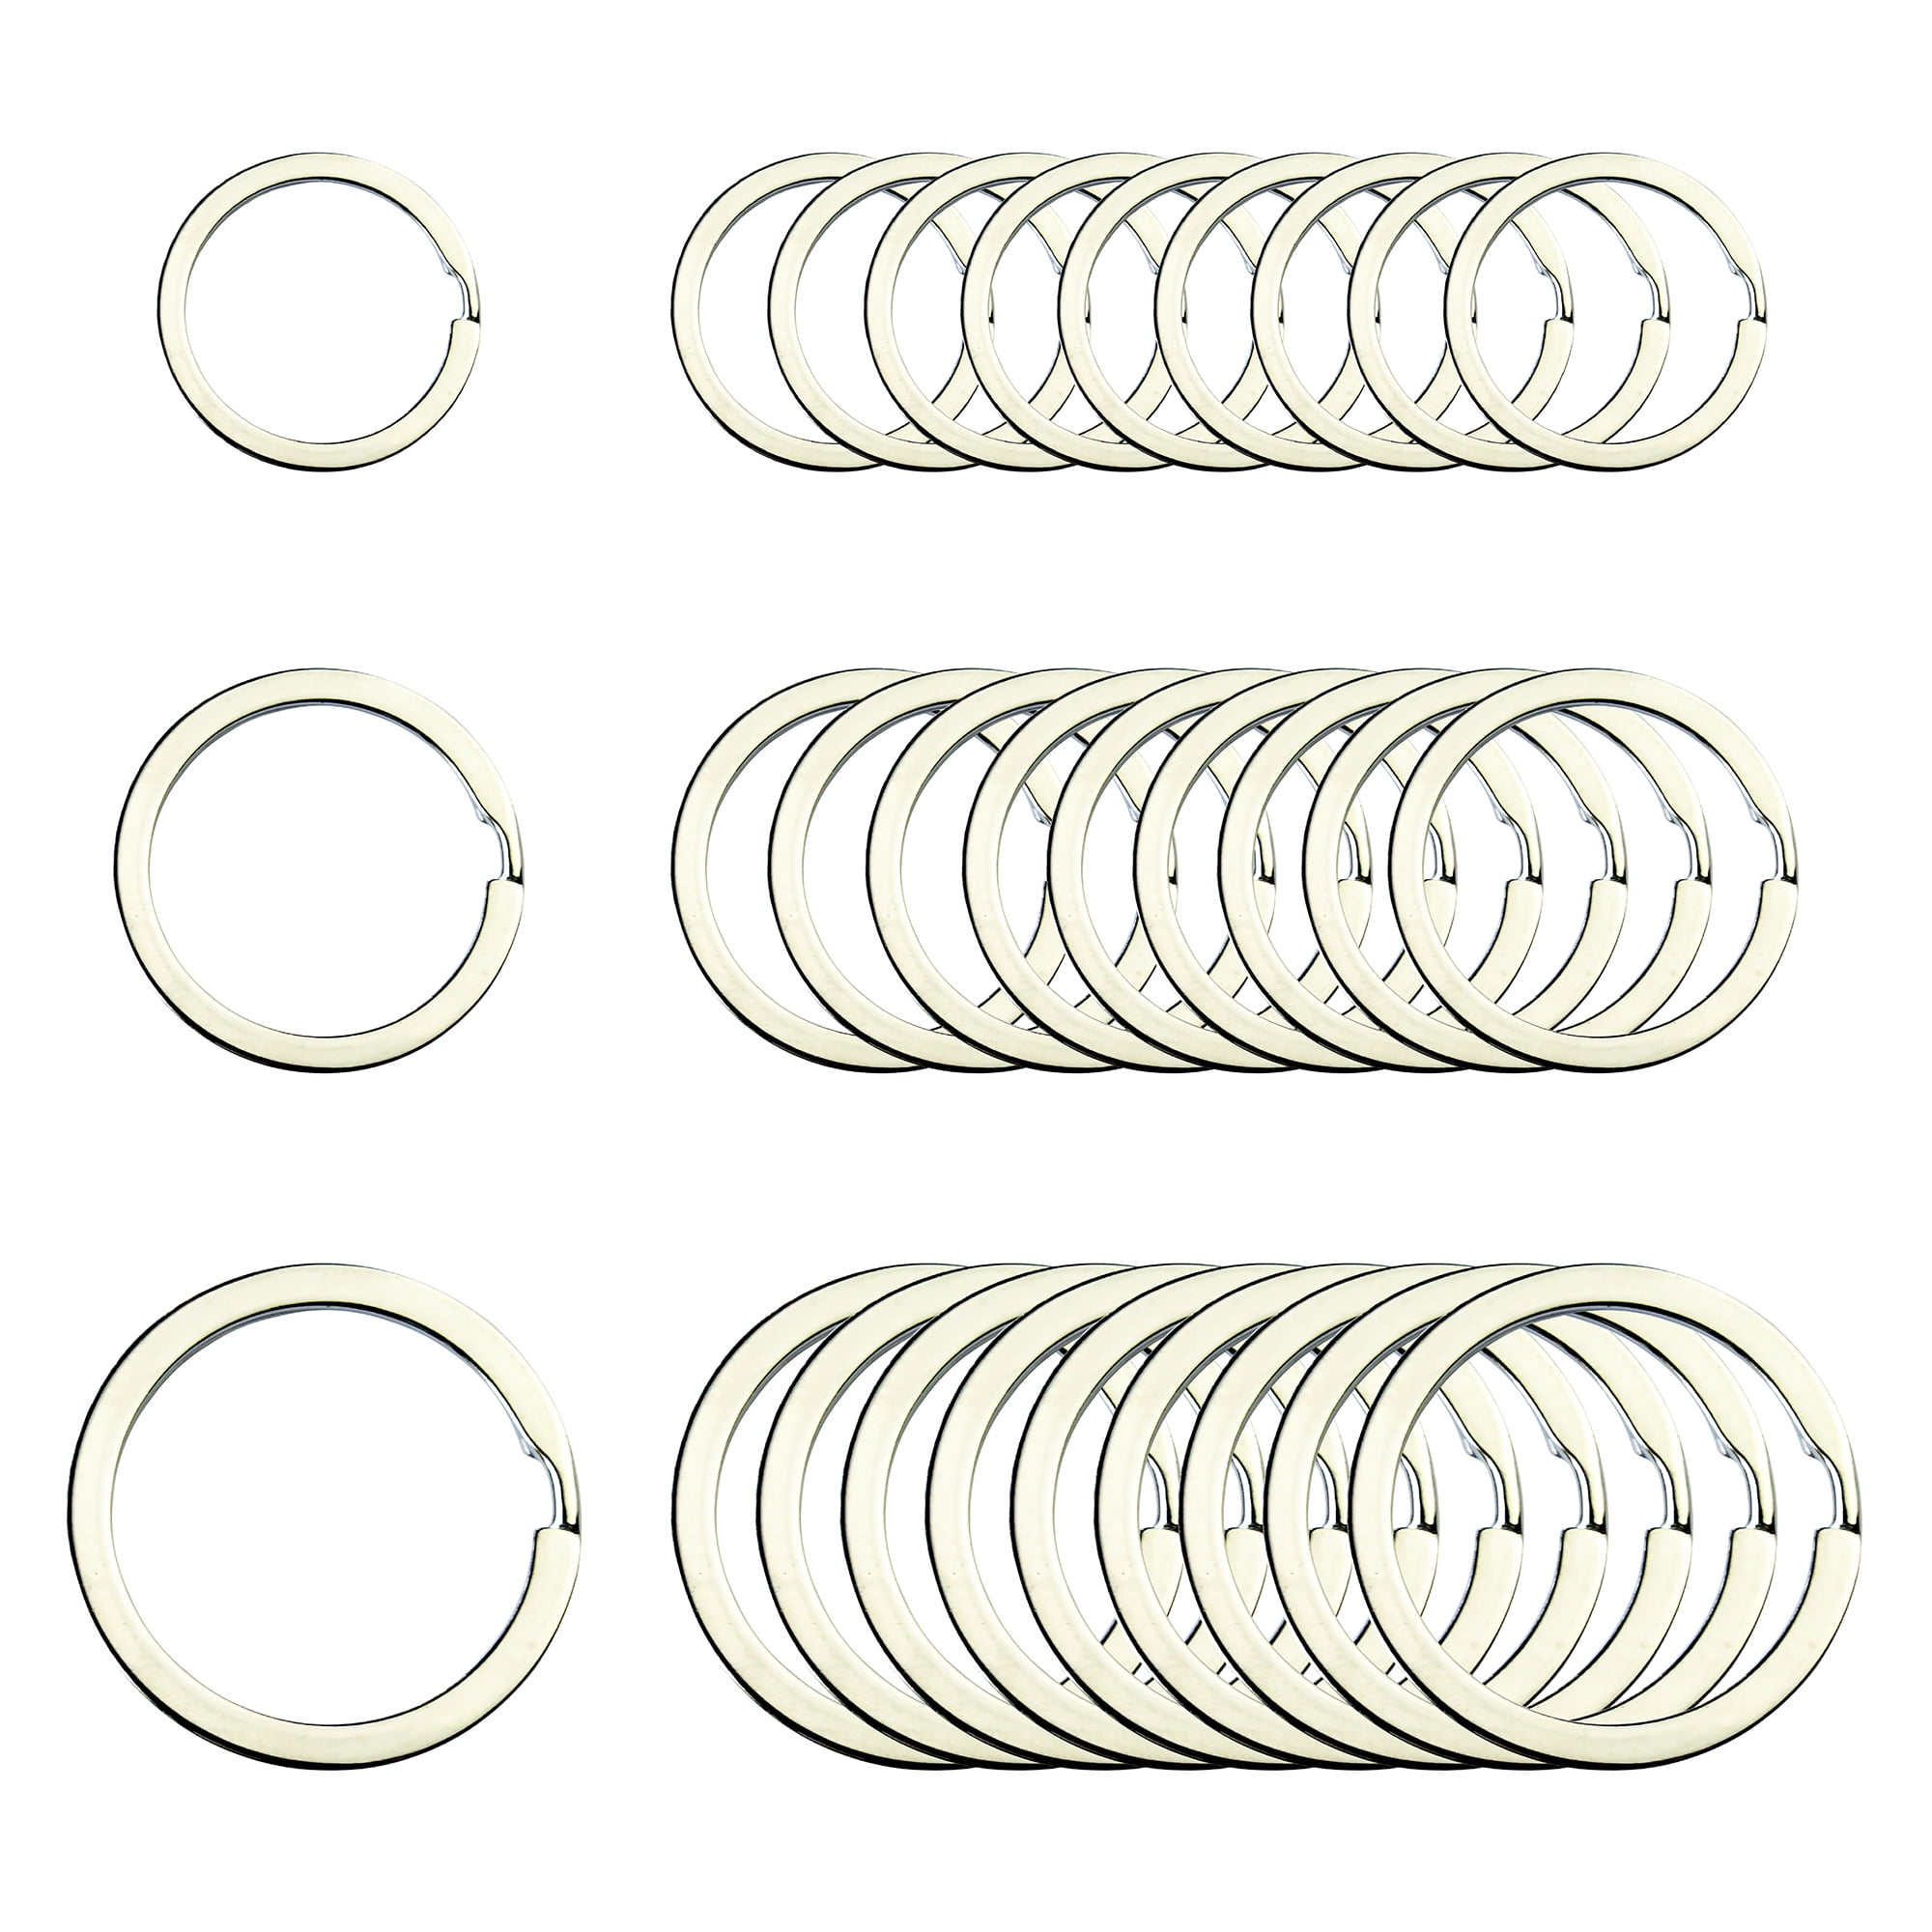 1 Inch and 1.25 Inch Silver Round Flat Key Chain Rings Metal Split 3/ 4 Inch 